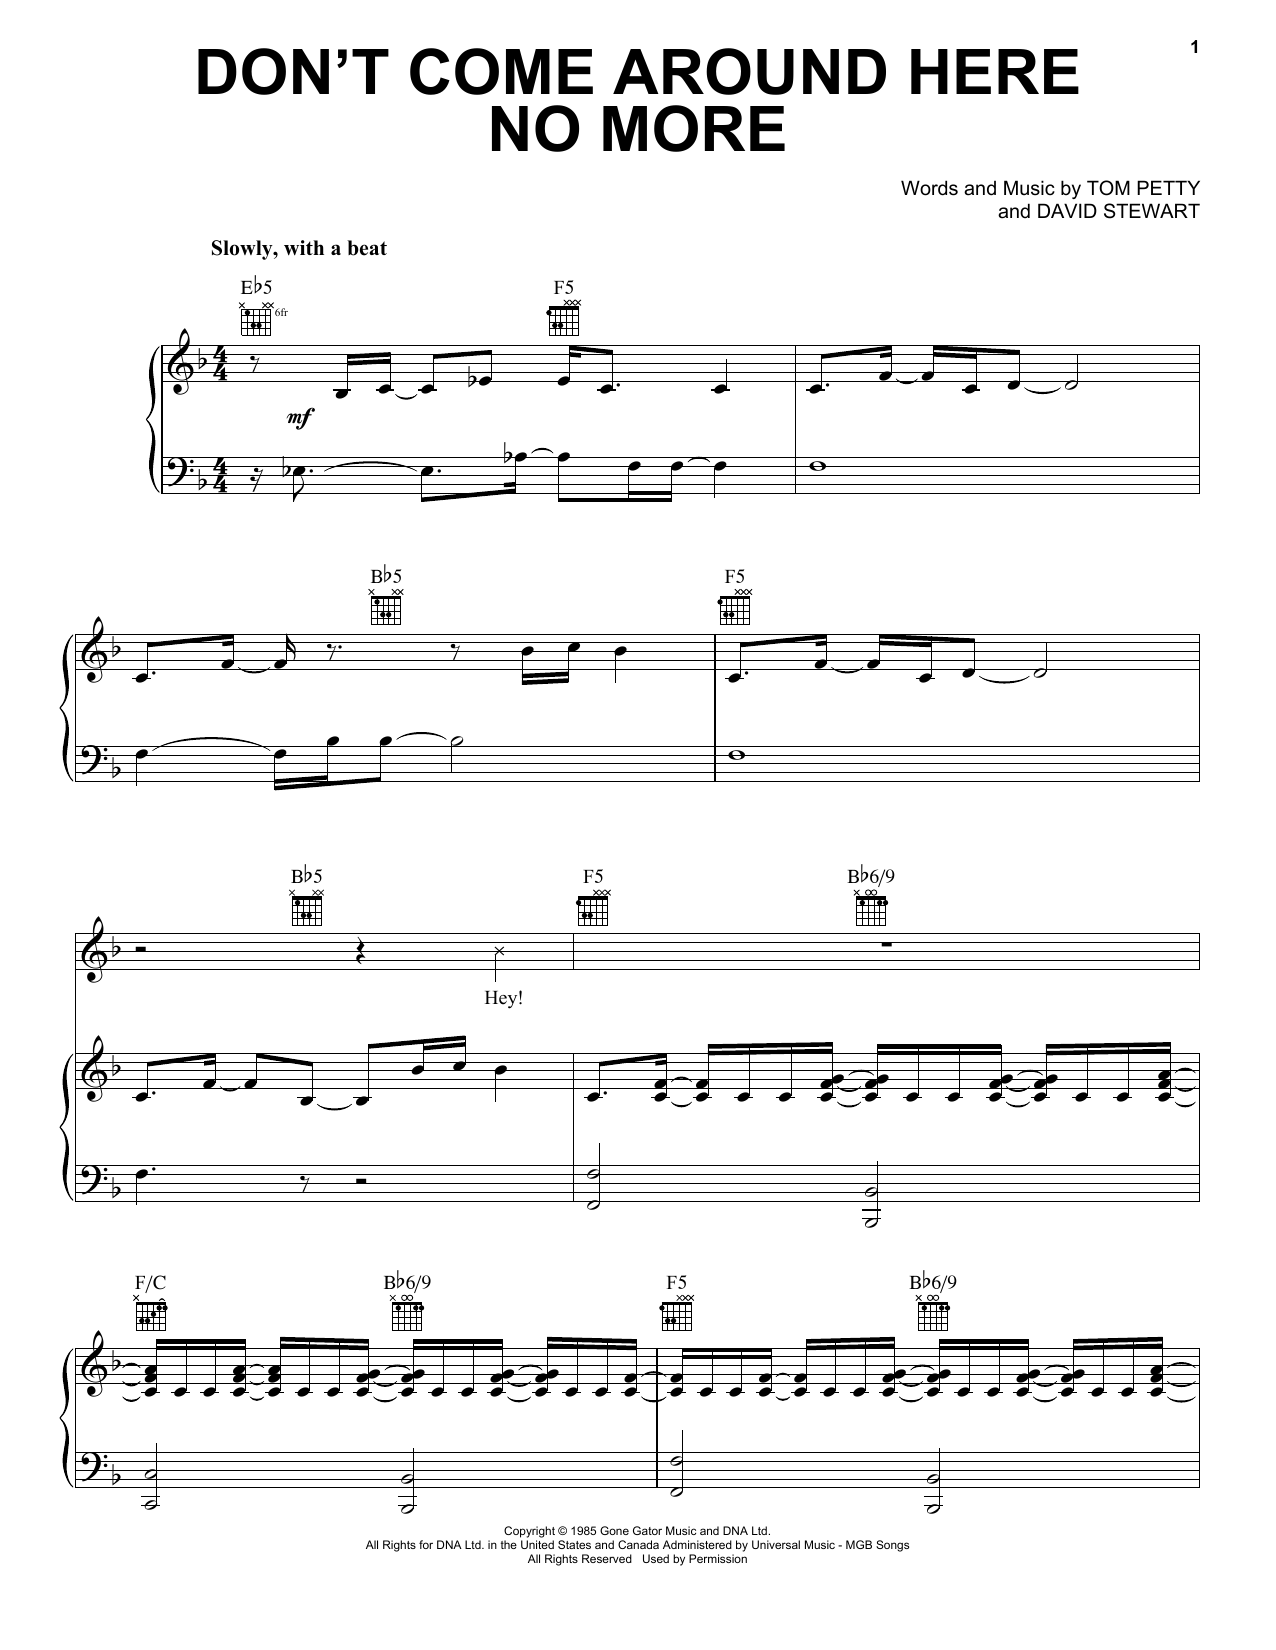 Tom Petty And The Heartbreakers Don't Come Around Here No More sheet music notes and chords. Download Printable PDF.